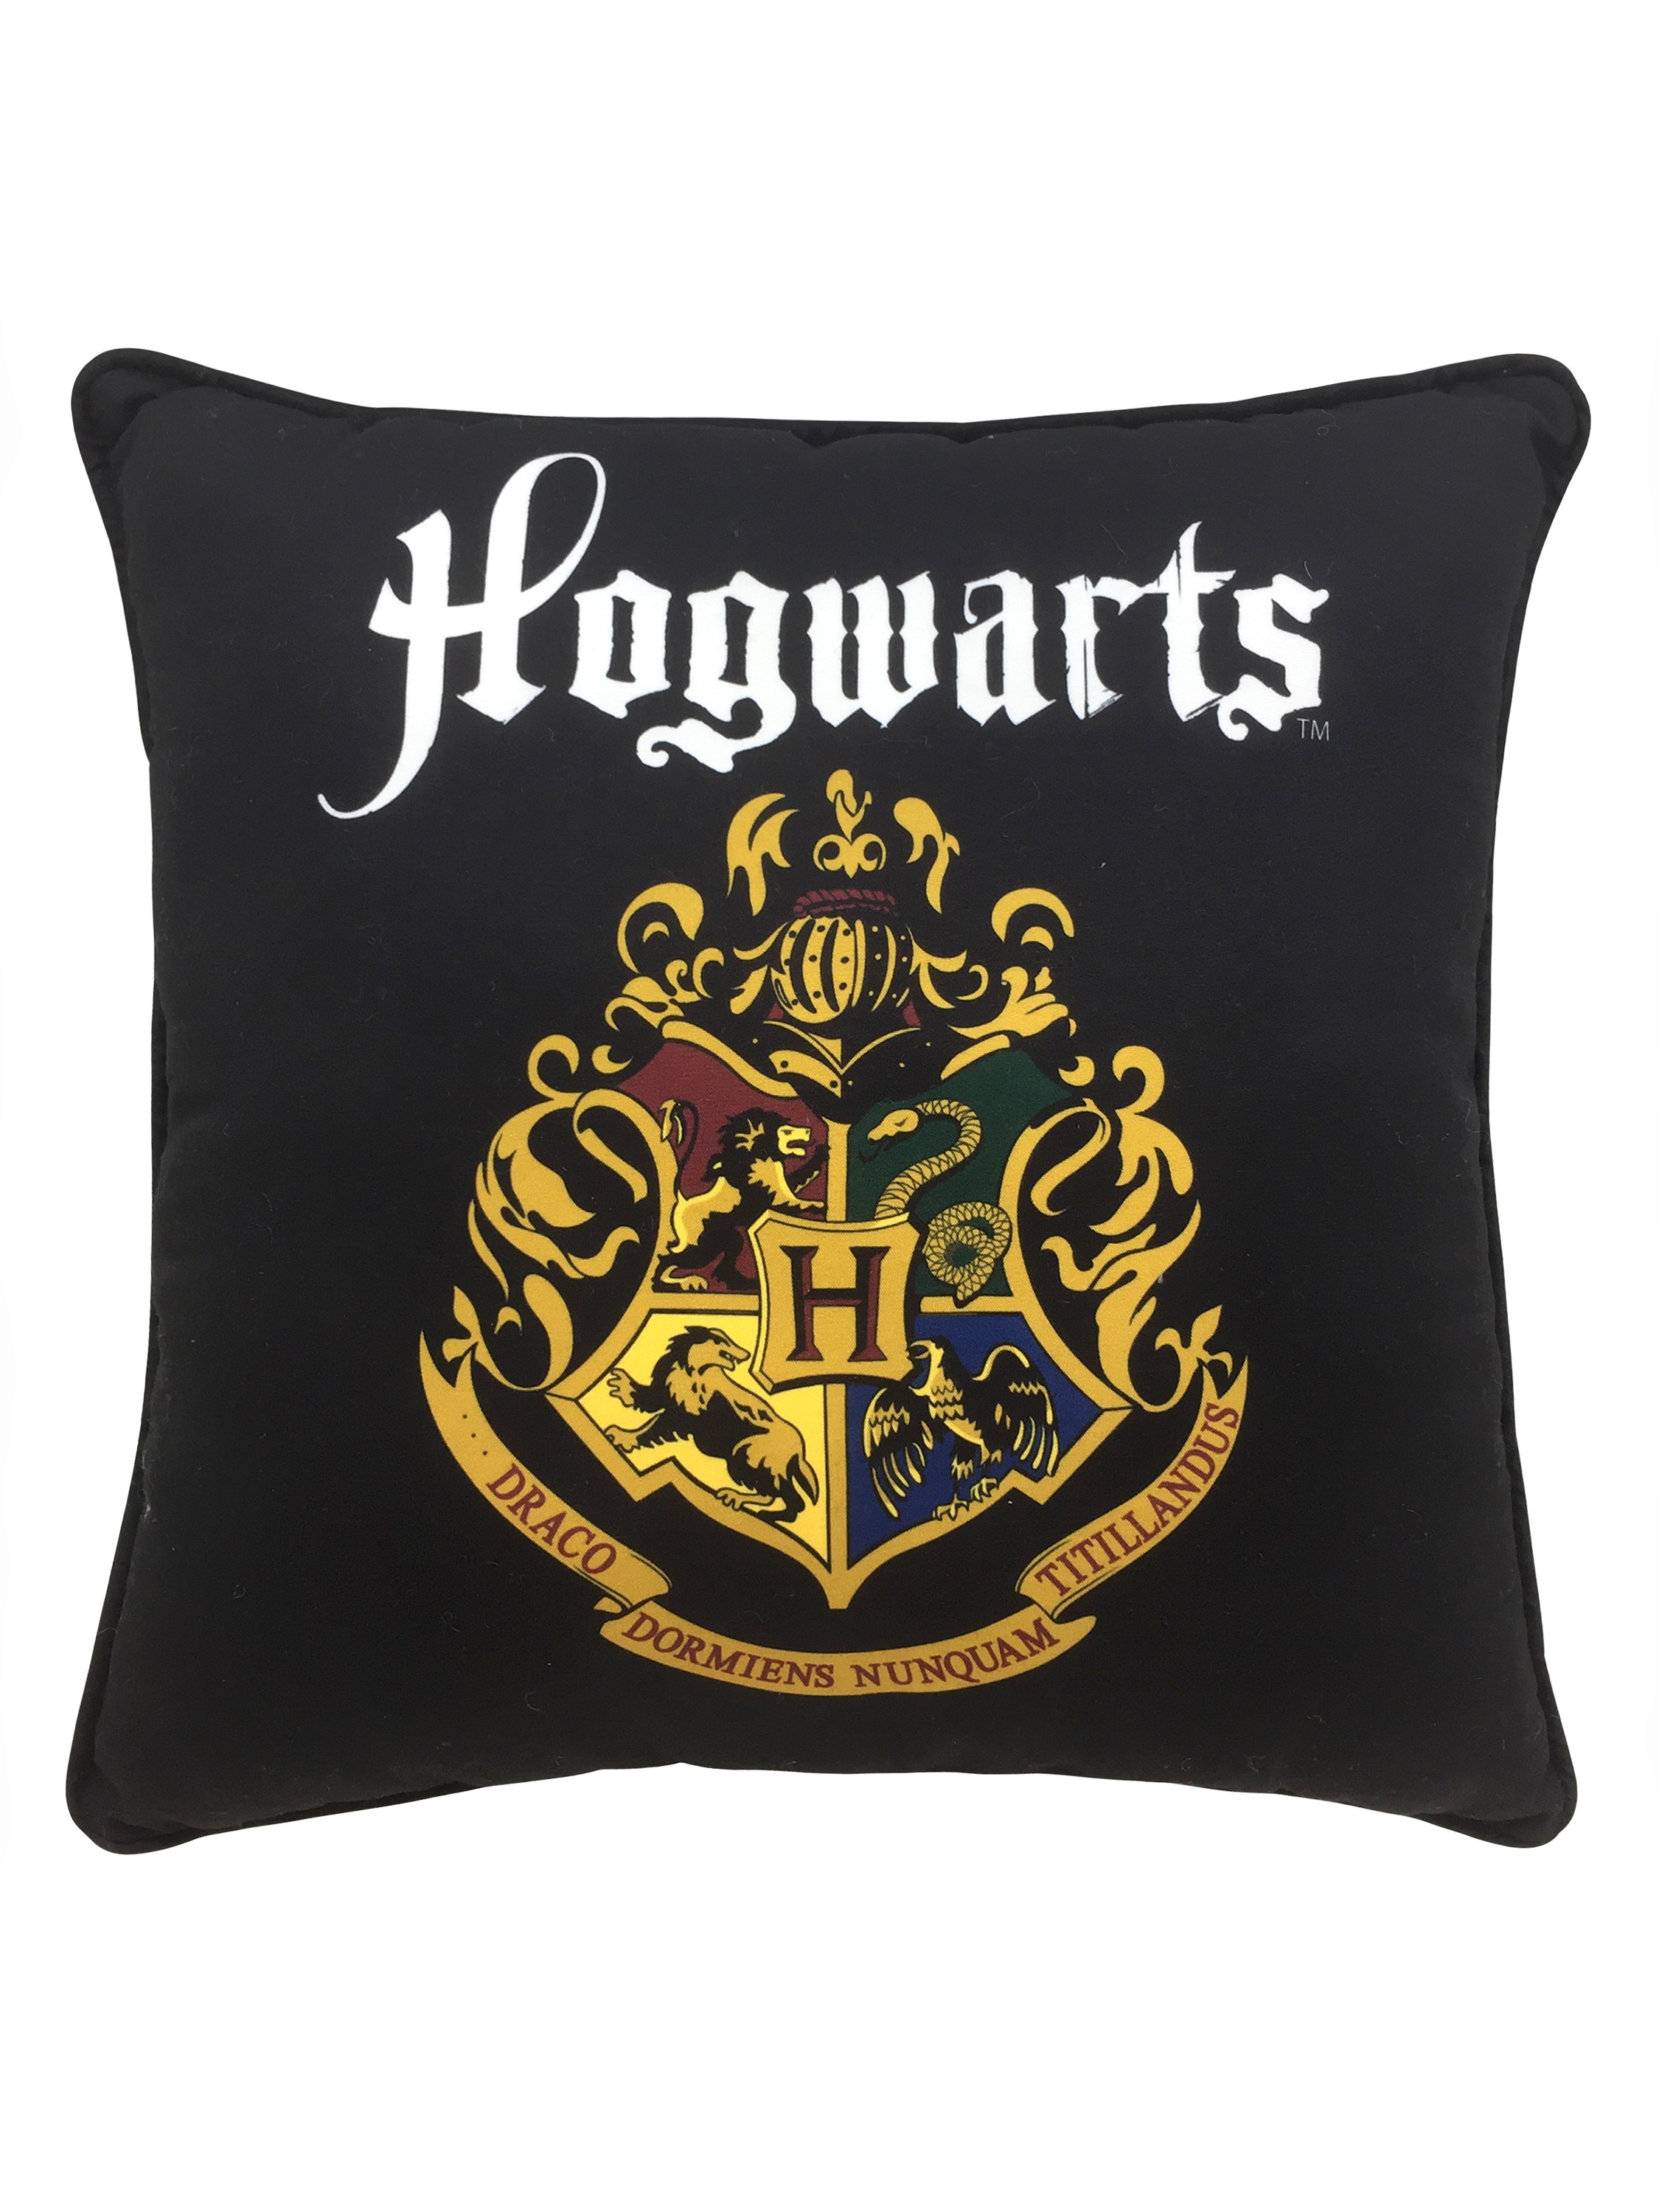 Harry Potter 'Hogwarts' 2 Piece Decorative Pillow and Blanket Set - image 4 of 5